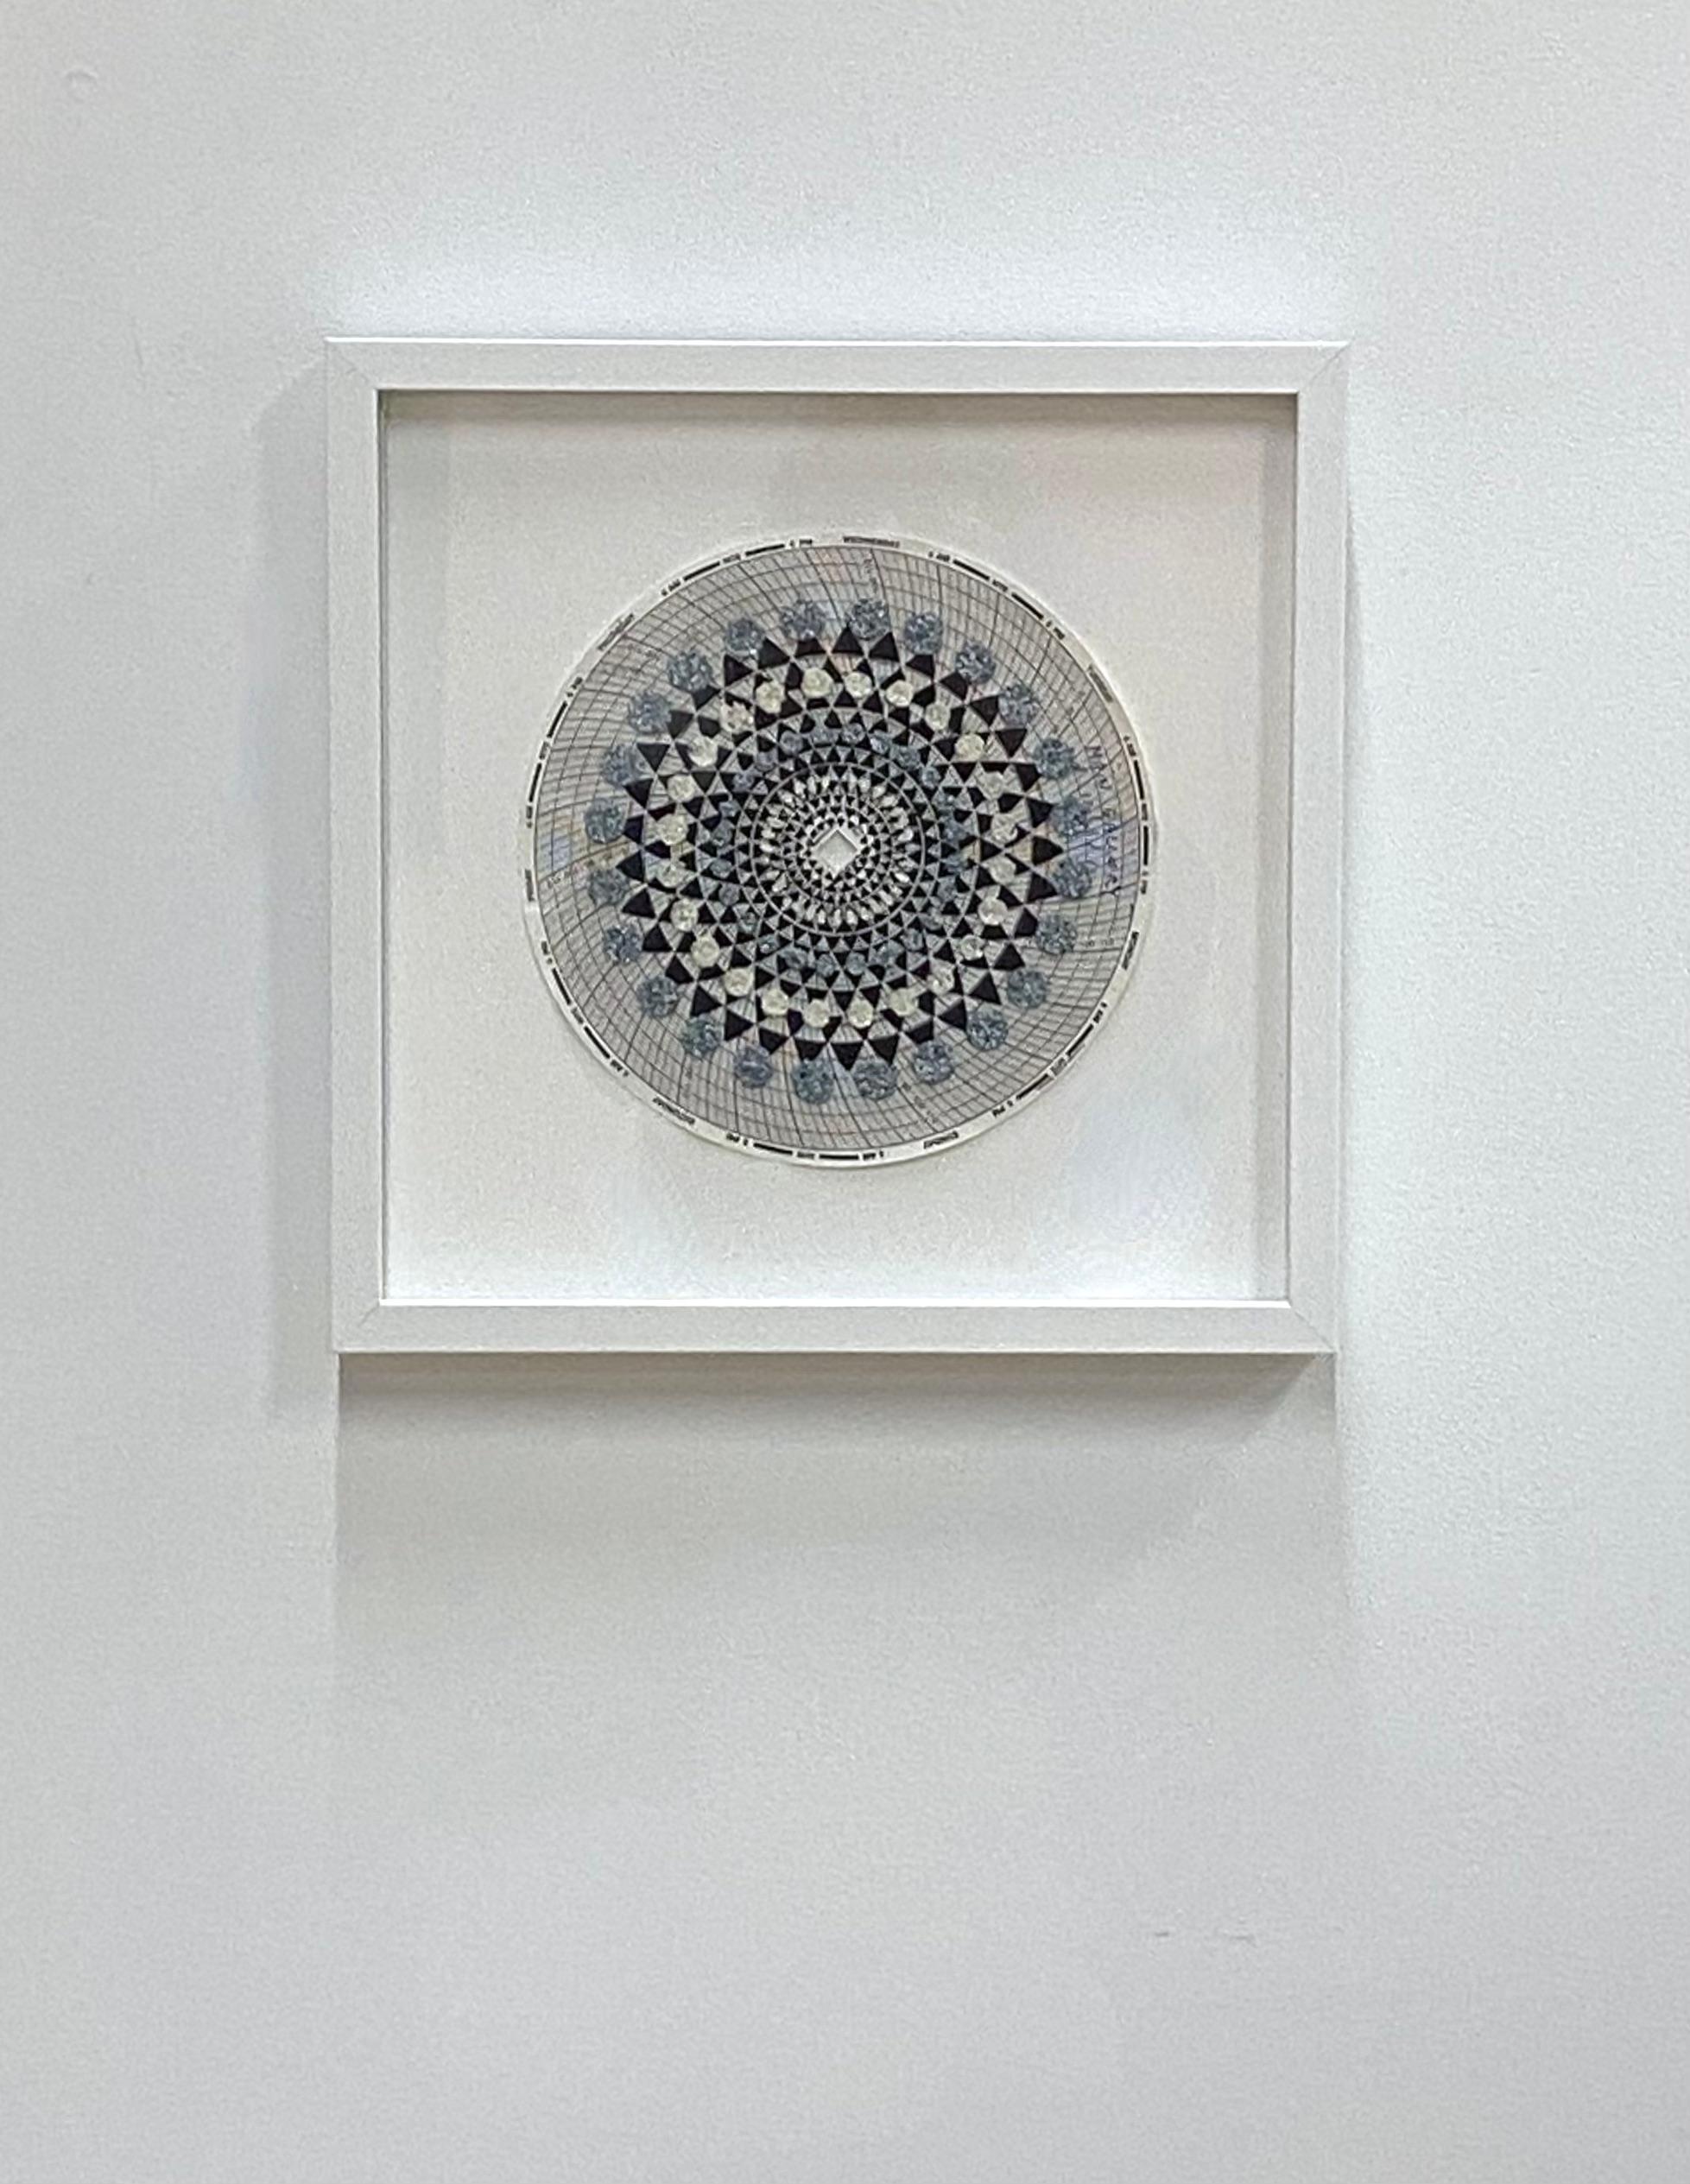 Carefully applied layers of emu eggshell and chicken eggshell, wood ash and polymer medium on hygrothermogaph paper create surface texture in this mandala made up of intricate patterns in an ordered, symmetrical, circular composition in blue, brown